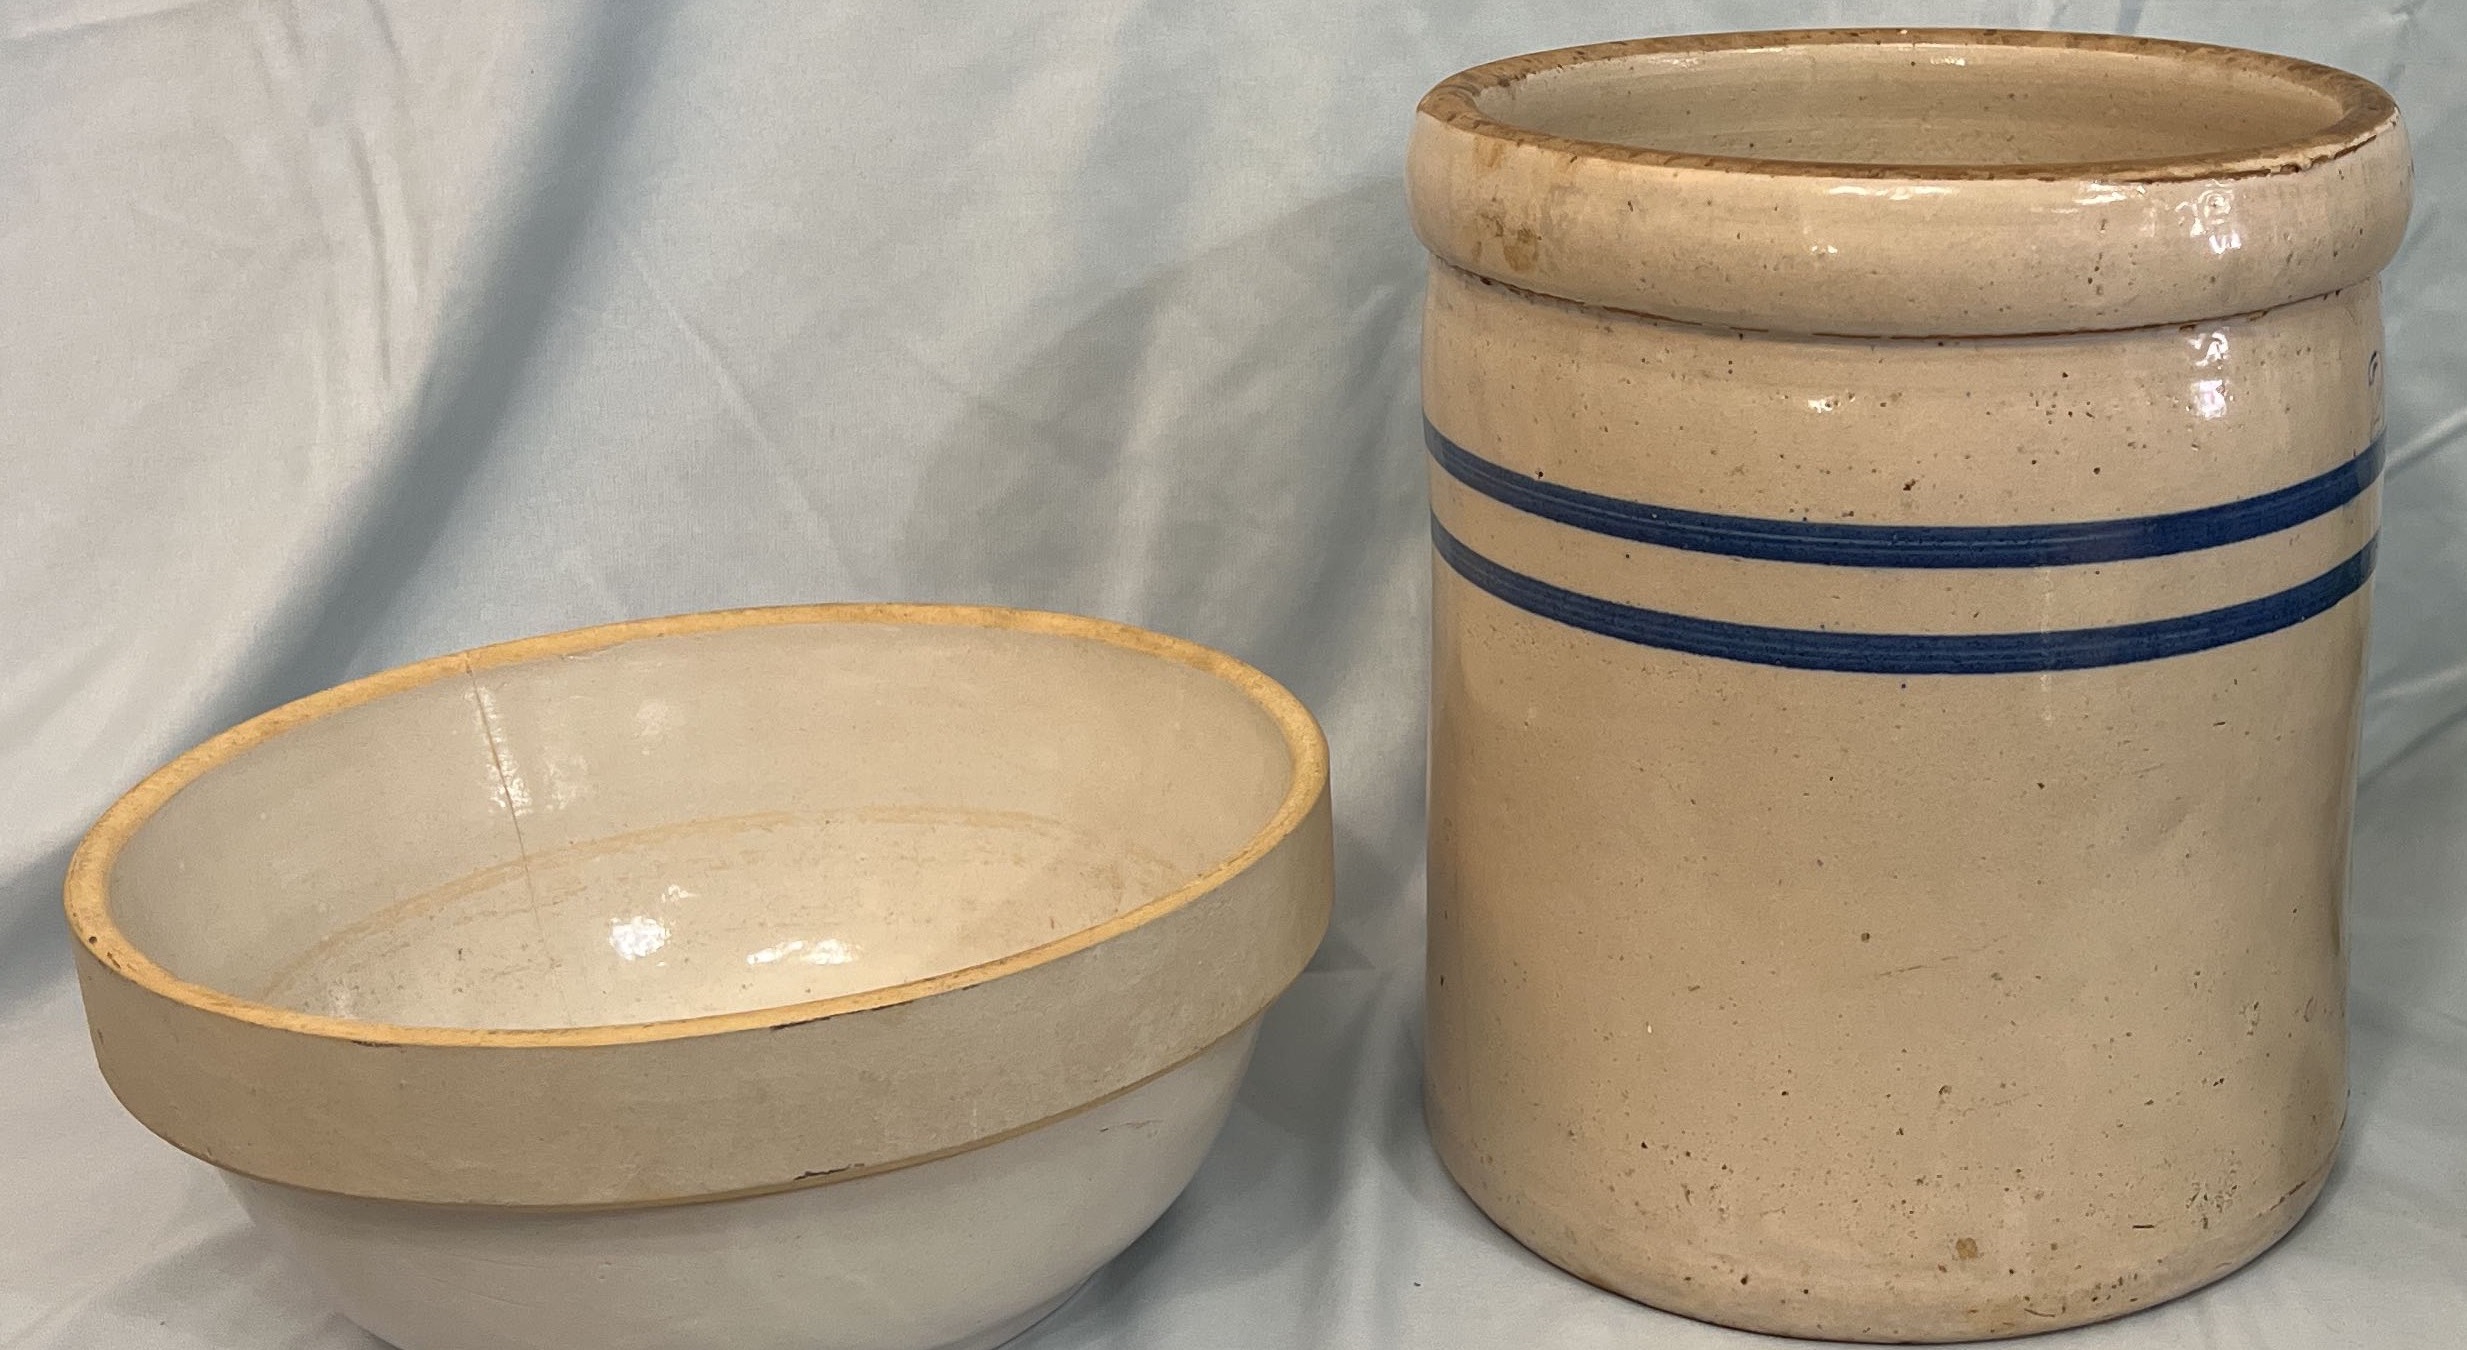 2 Gallon Hand-Turned Pottery Butter Churn